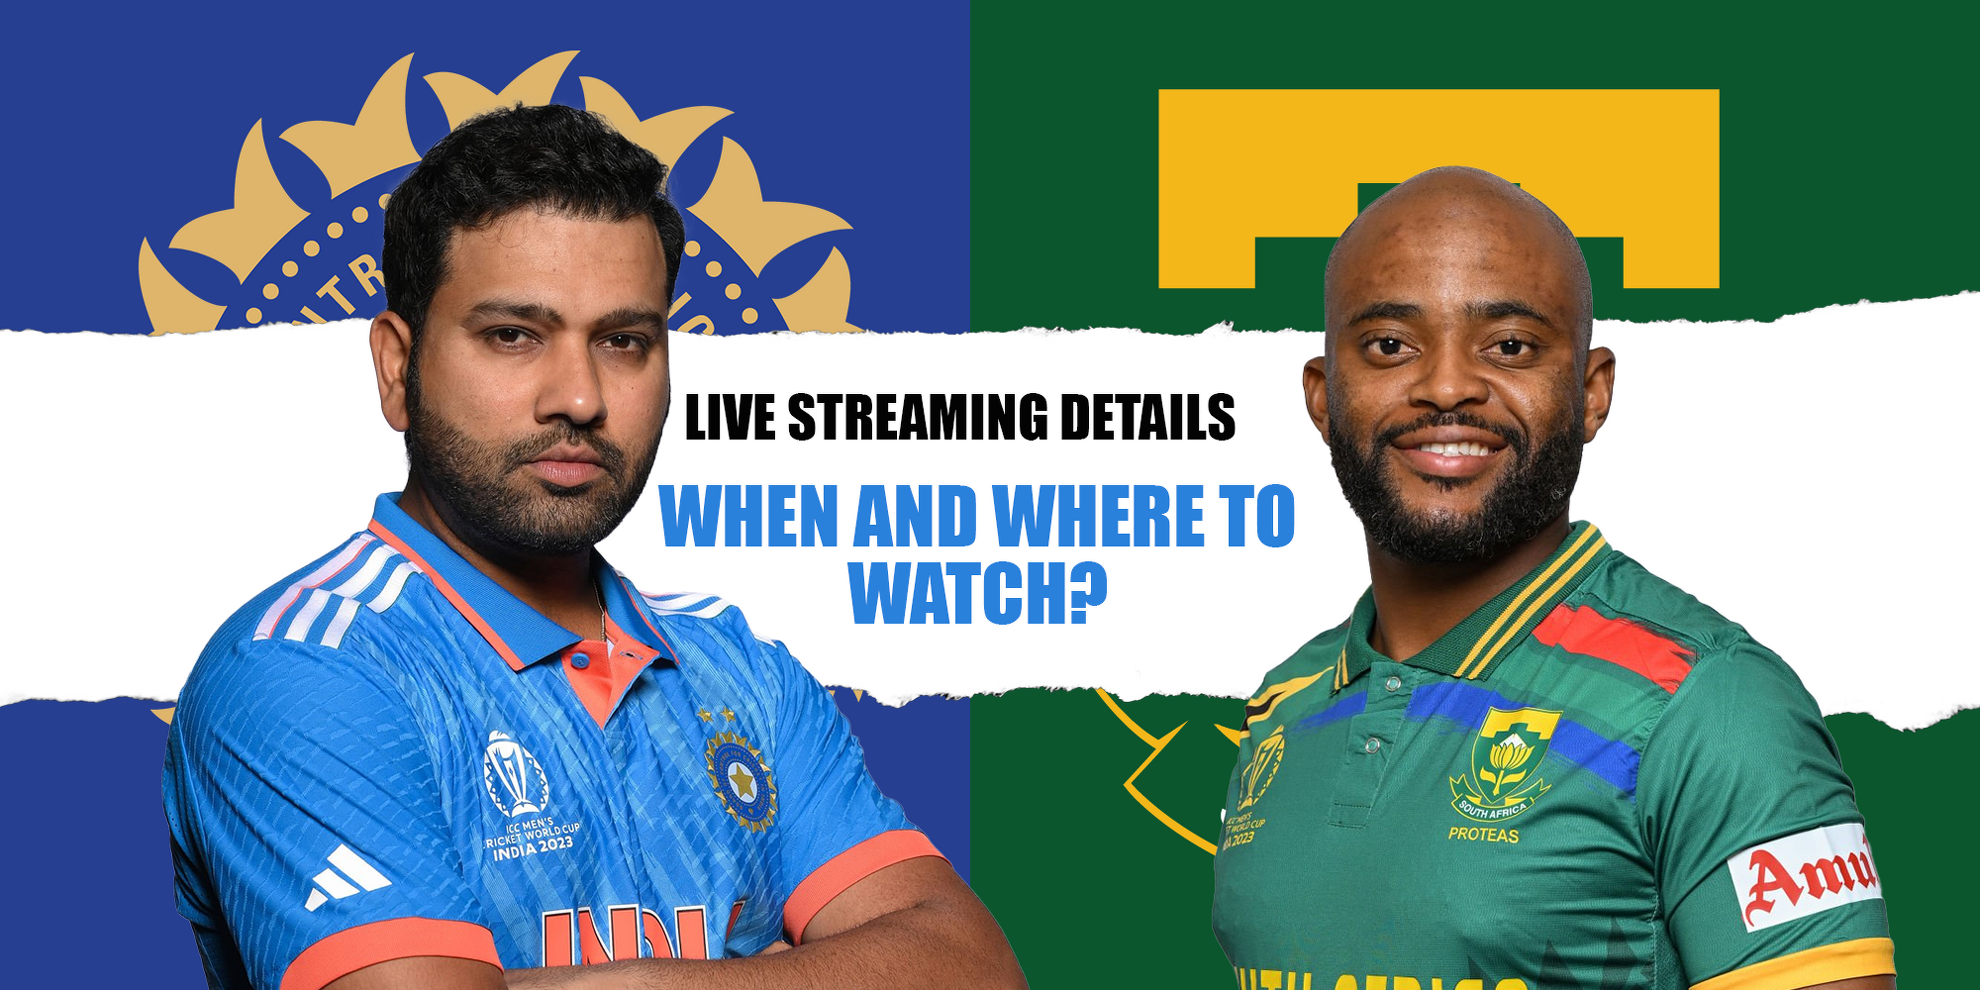 IND vs SA Live streaming details, when and where to watch ICC Cricket